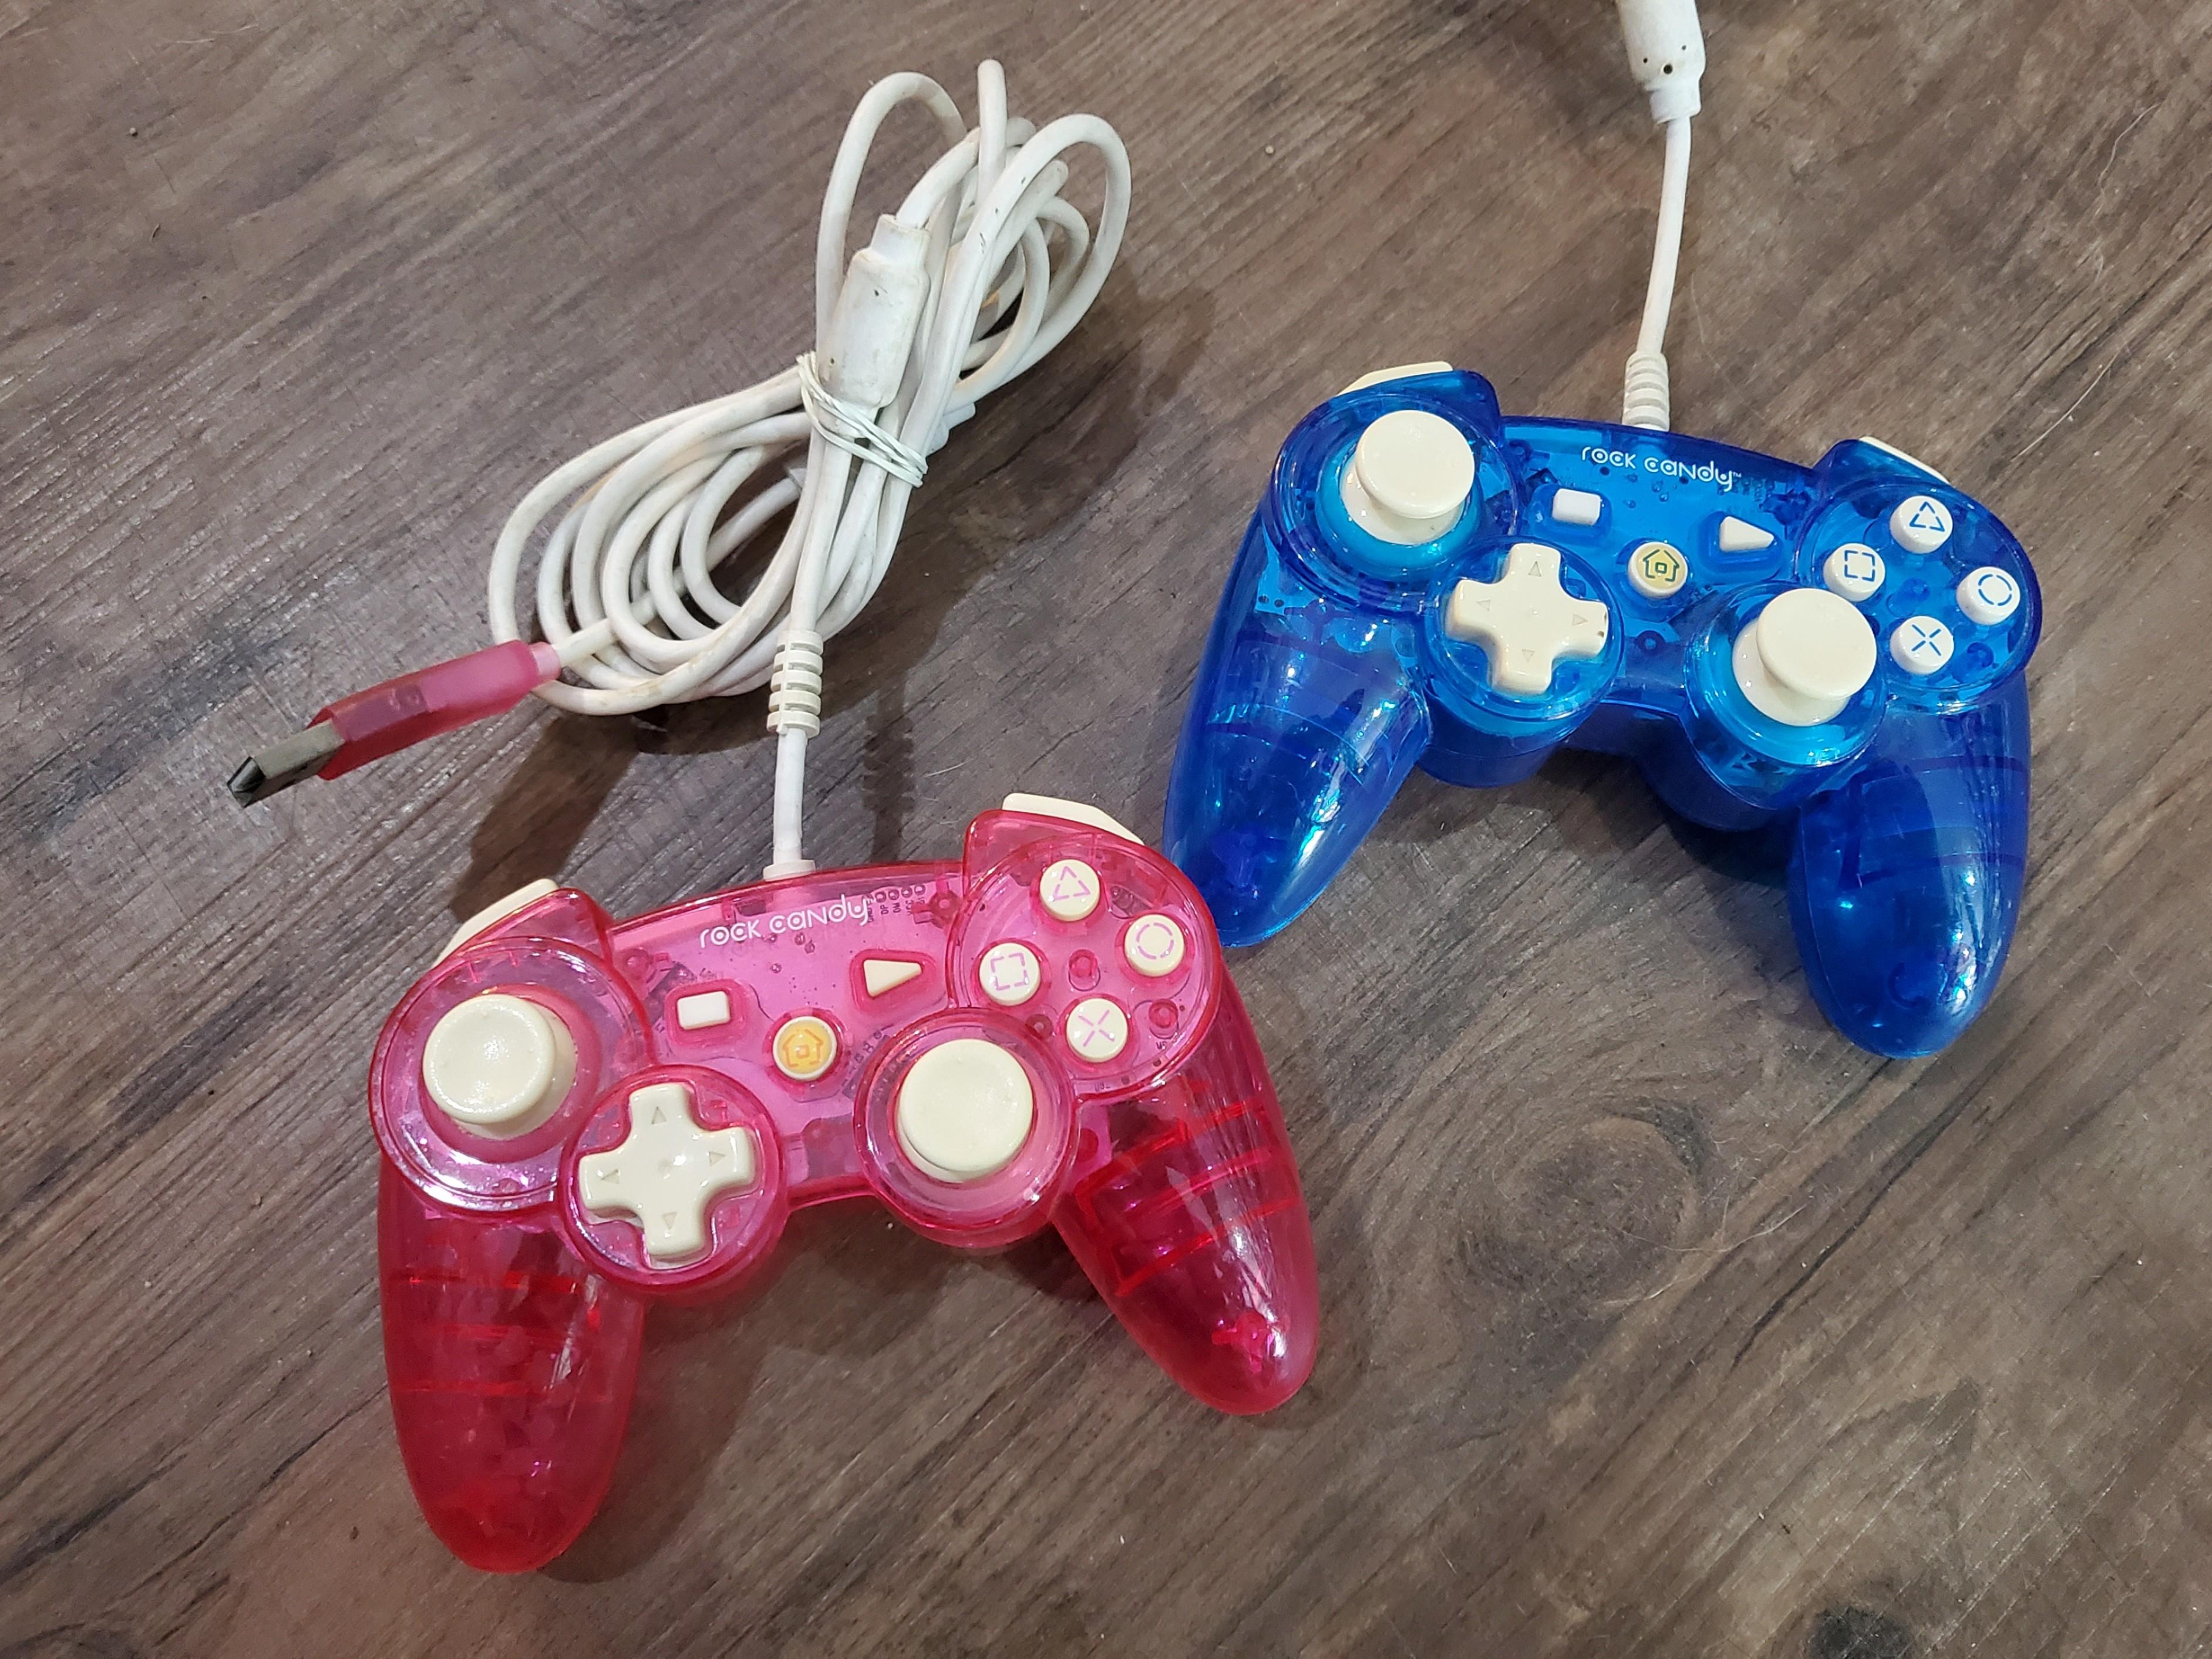 rock candy controller ps3